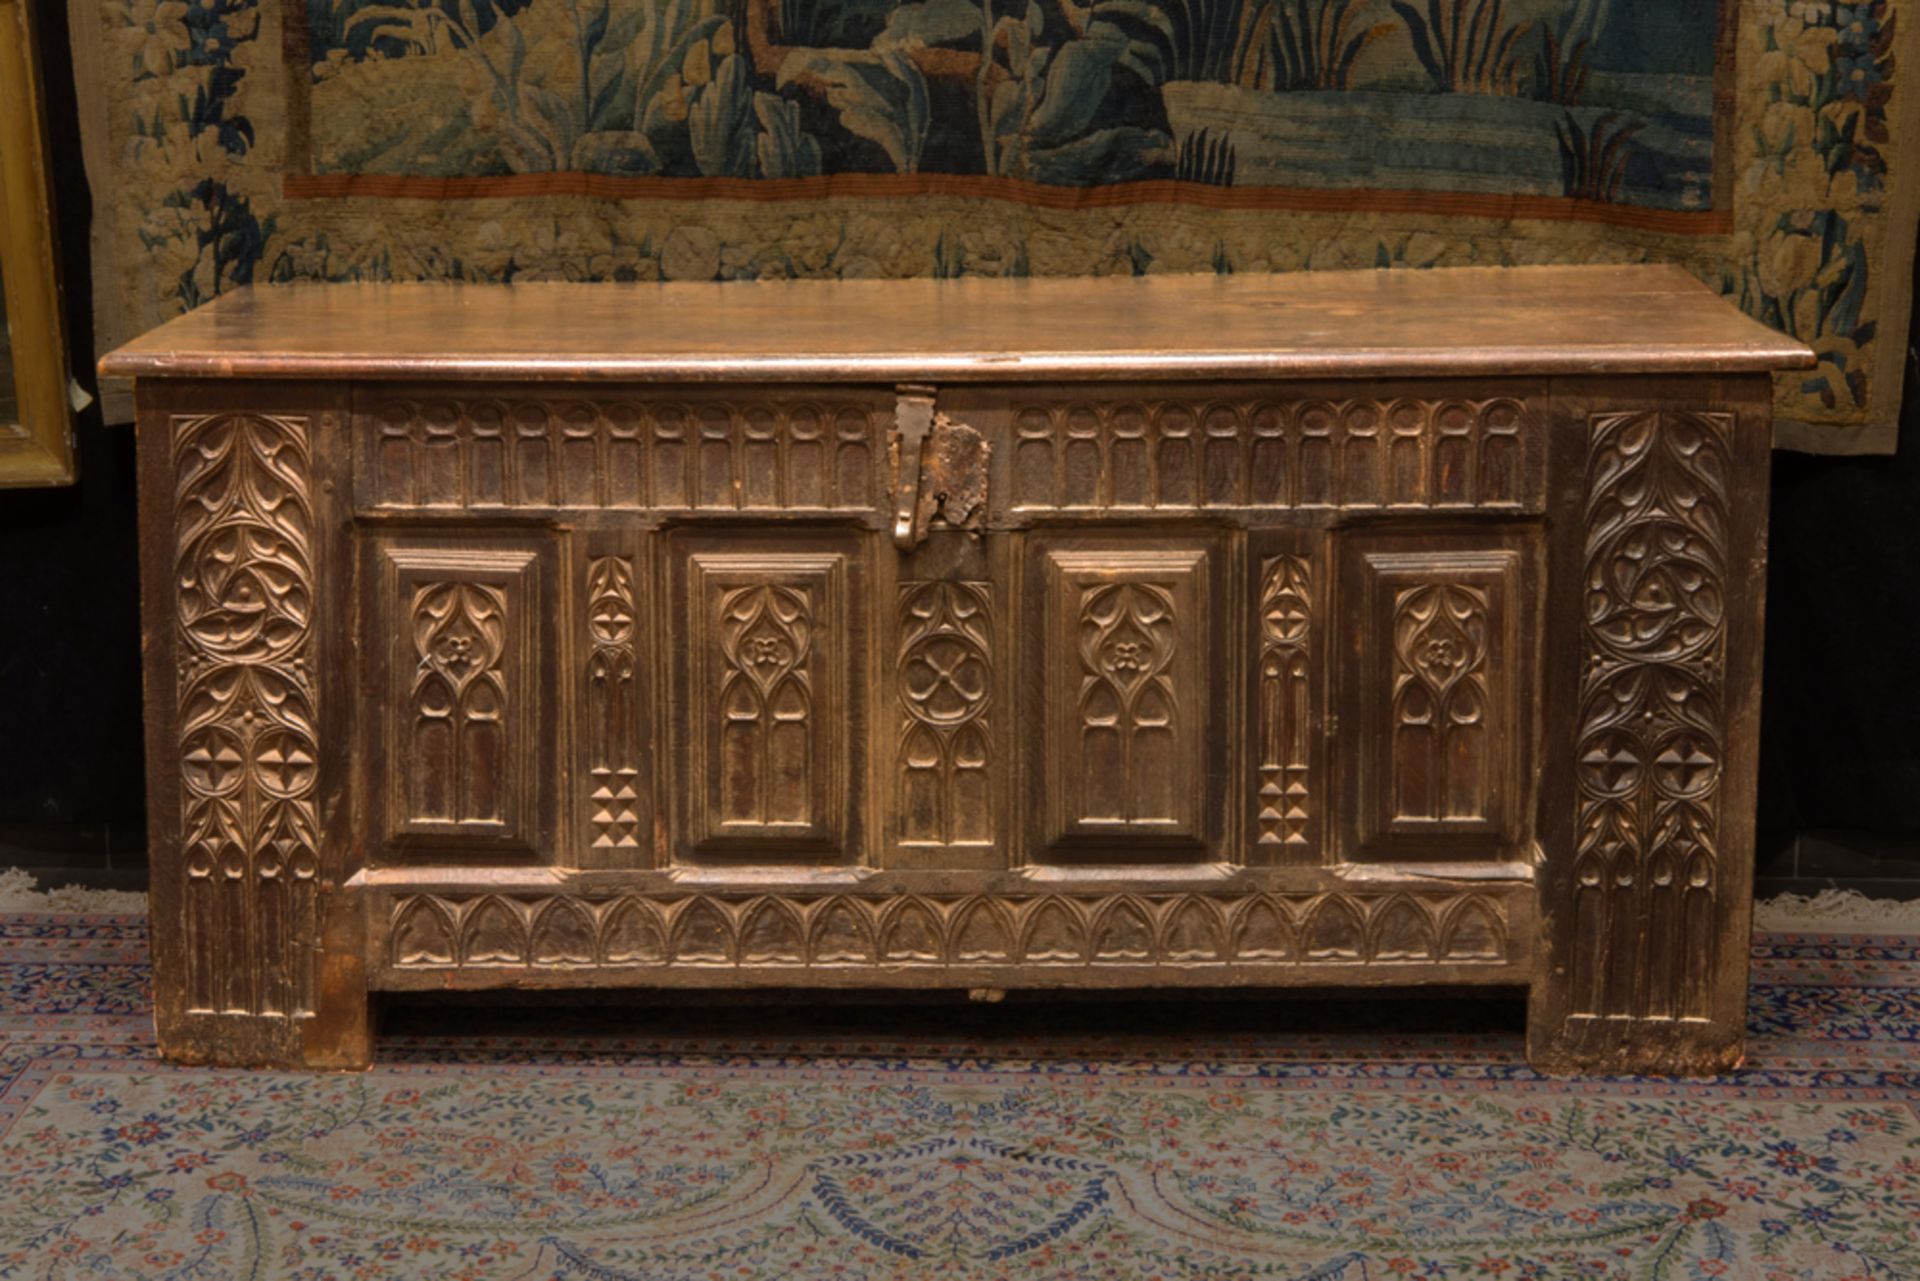 quite big antique oak chest with front with gothic style panels with typical tracery || Vrij grote